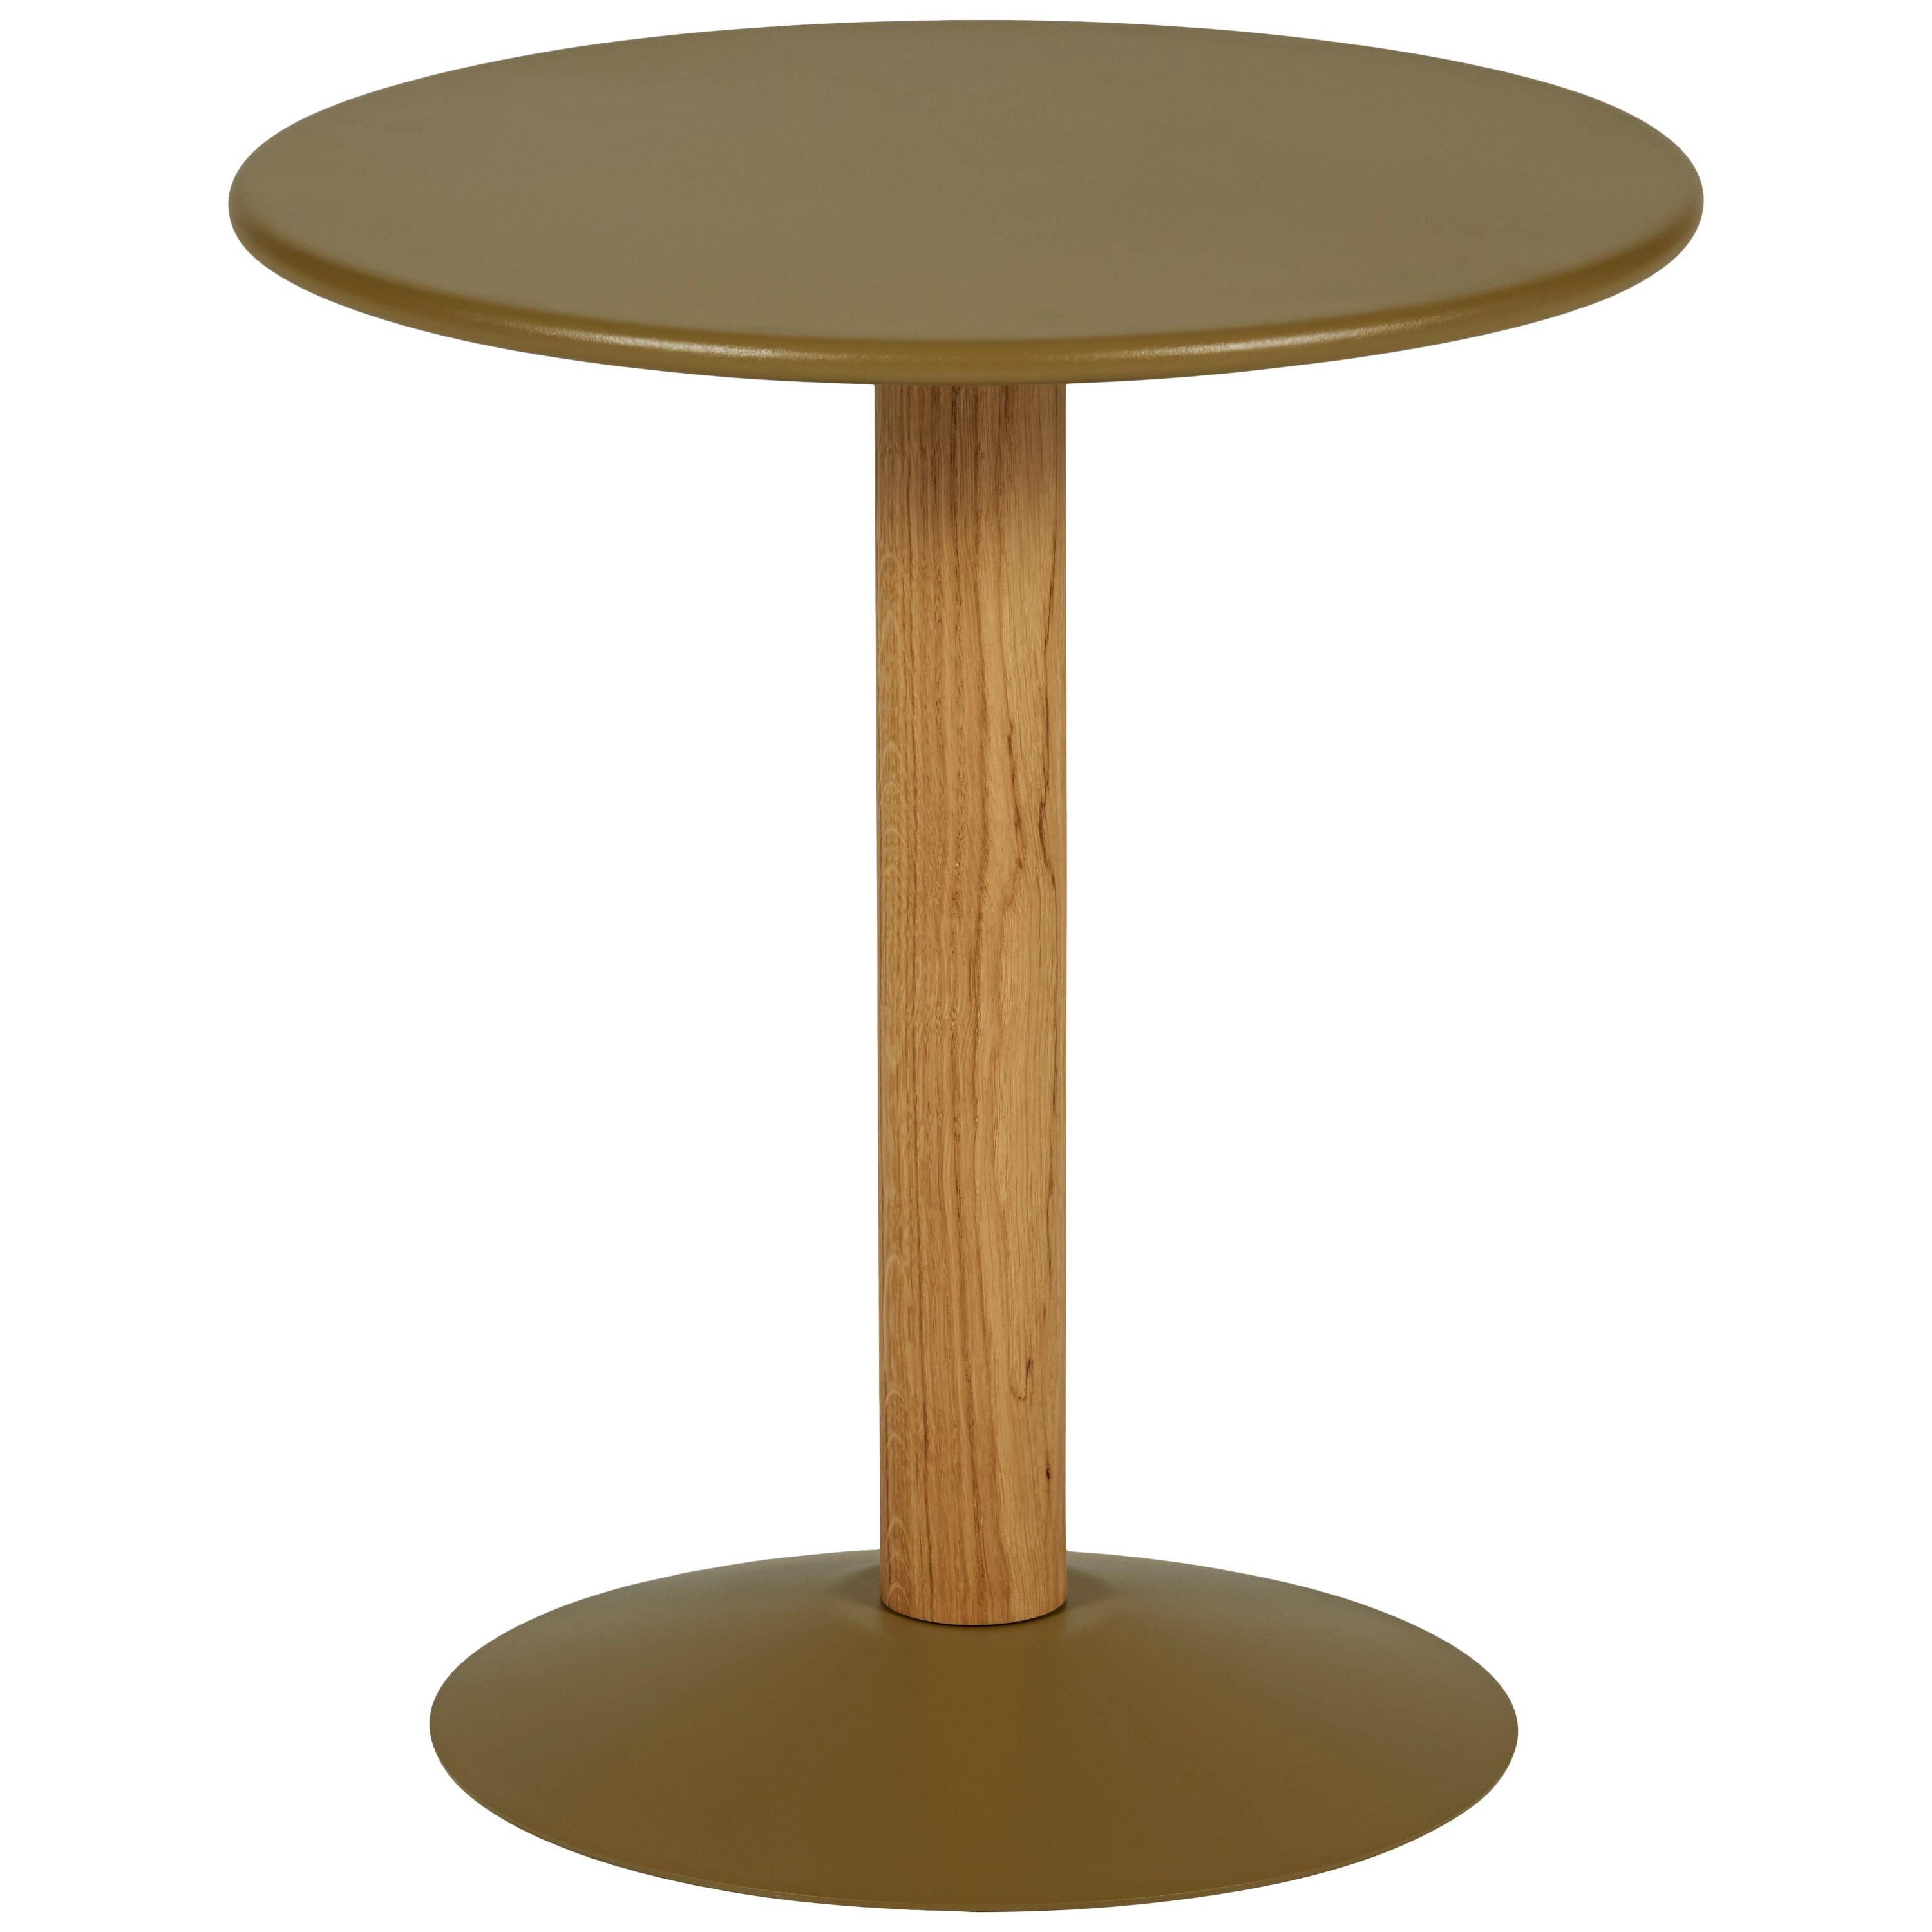 For Sale: Brown (Kaki) Gueridon C16 Round Pedestal Table in Pop Colors by Chantal Andriot & Tolix